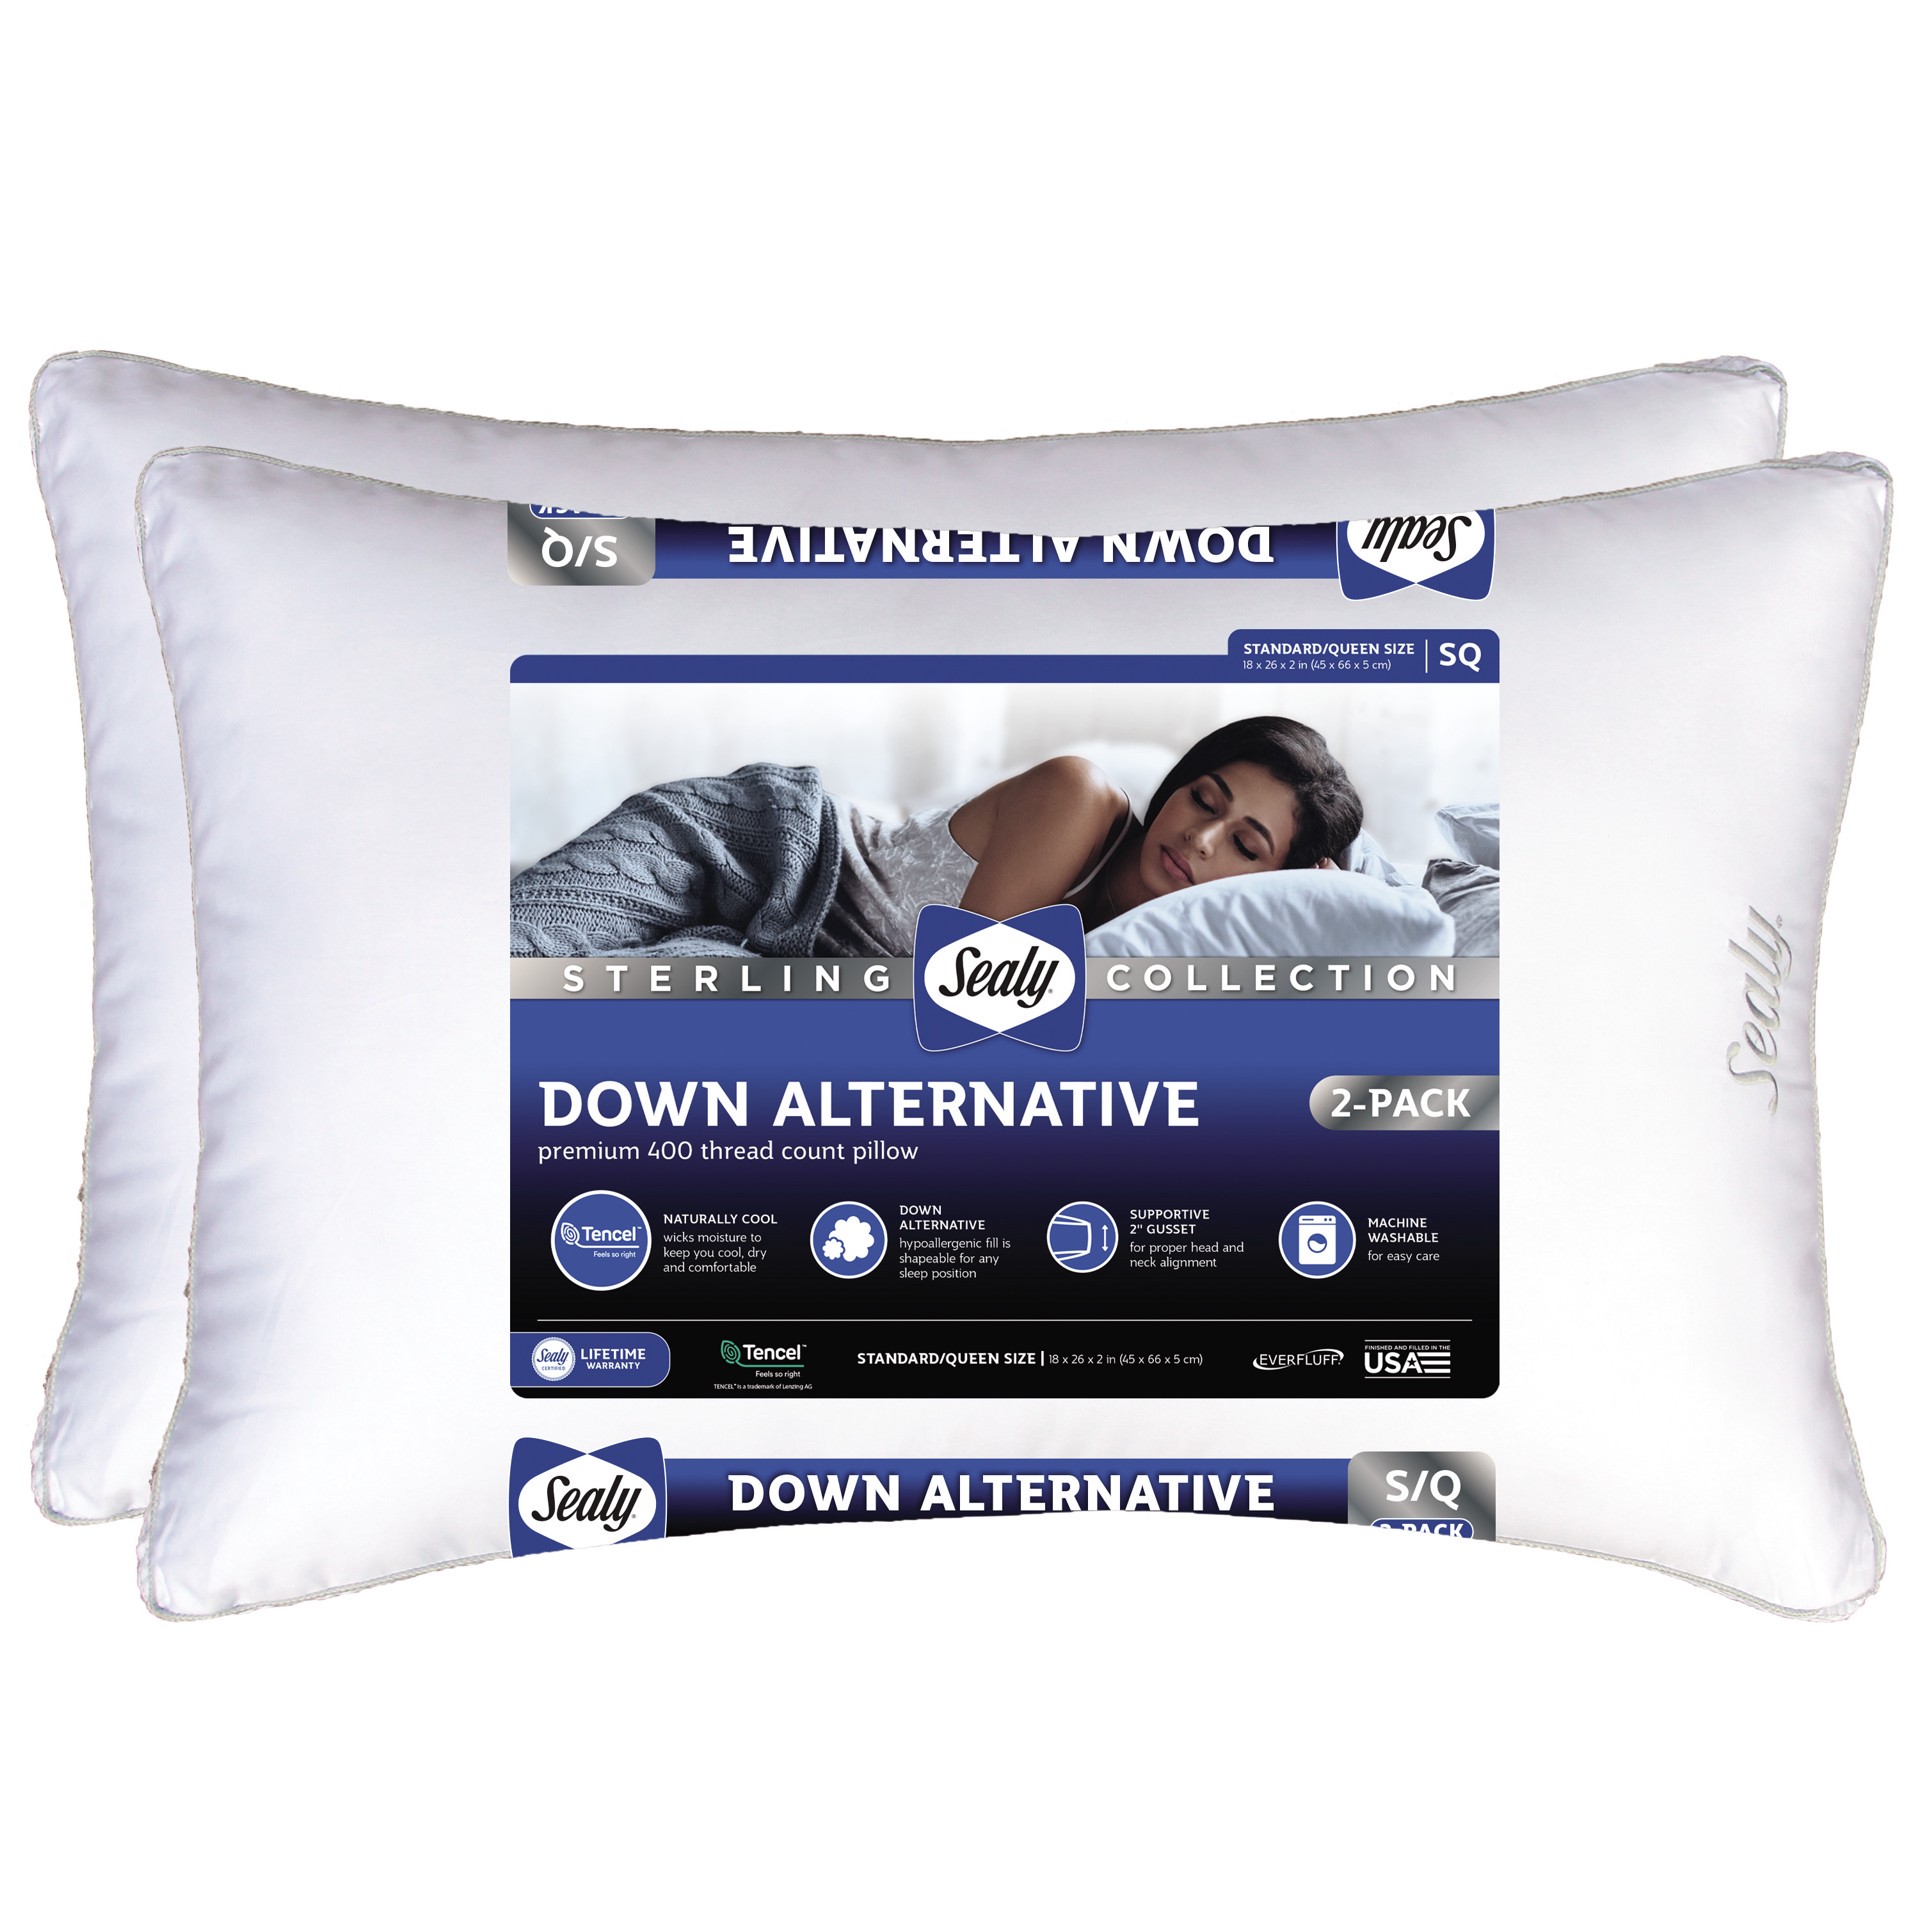 Sealy Cool Support Extra Firm Support Standard Size Pillows